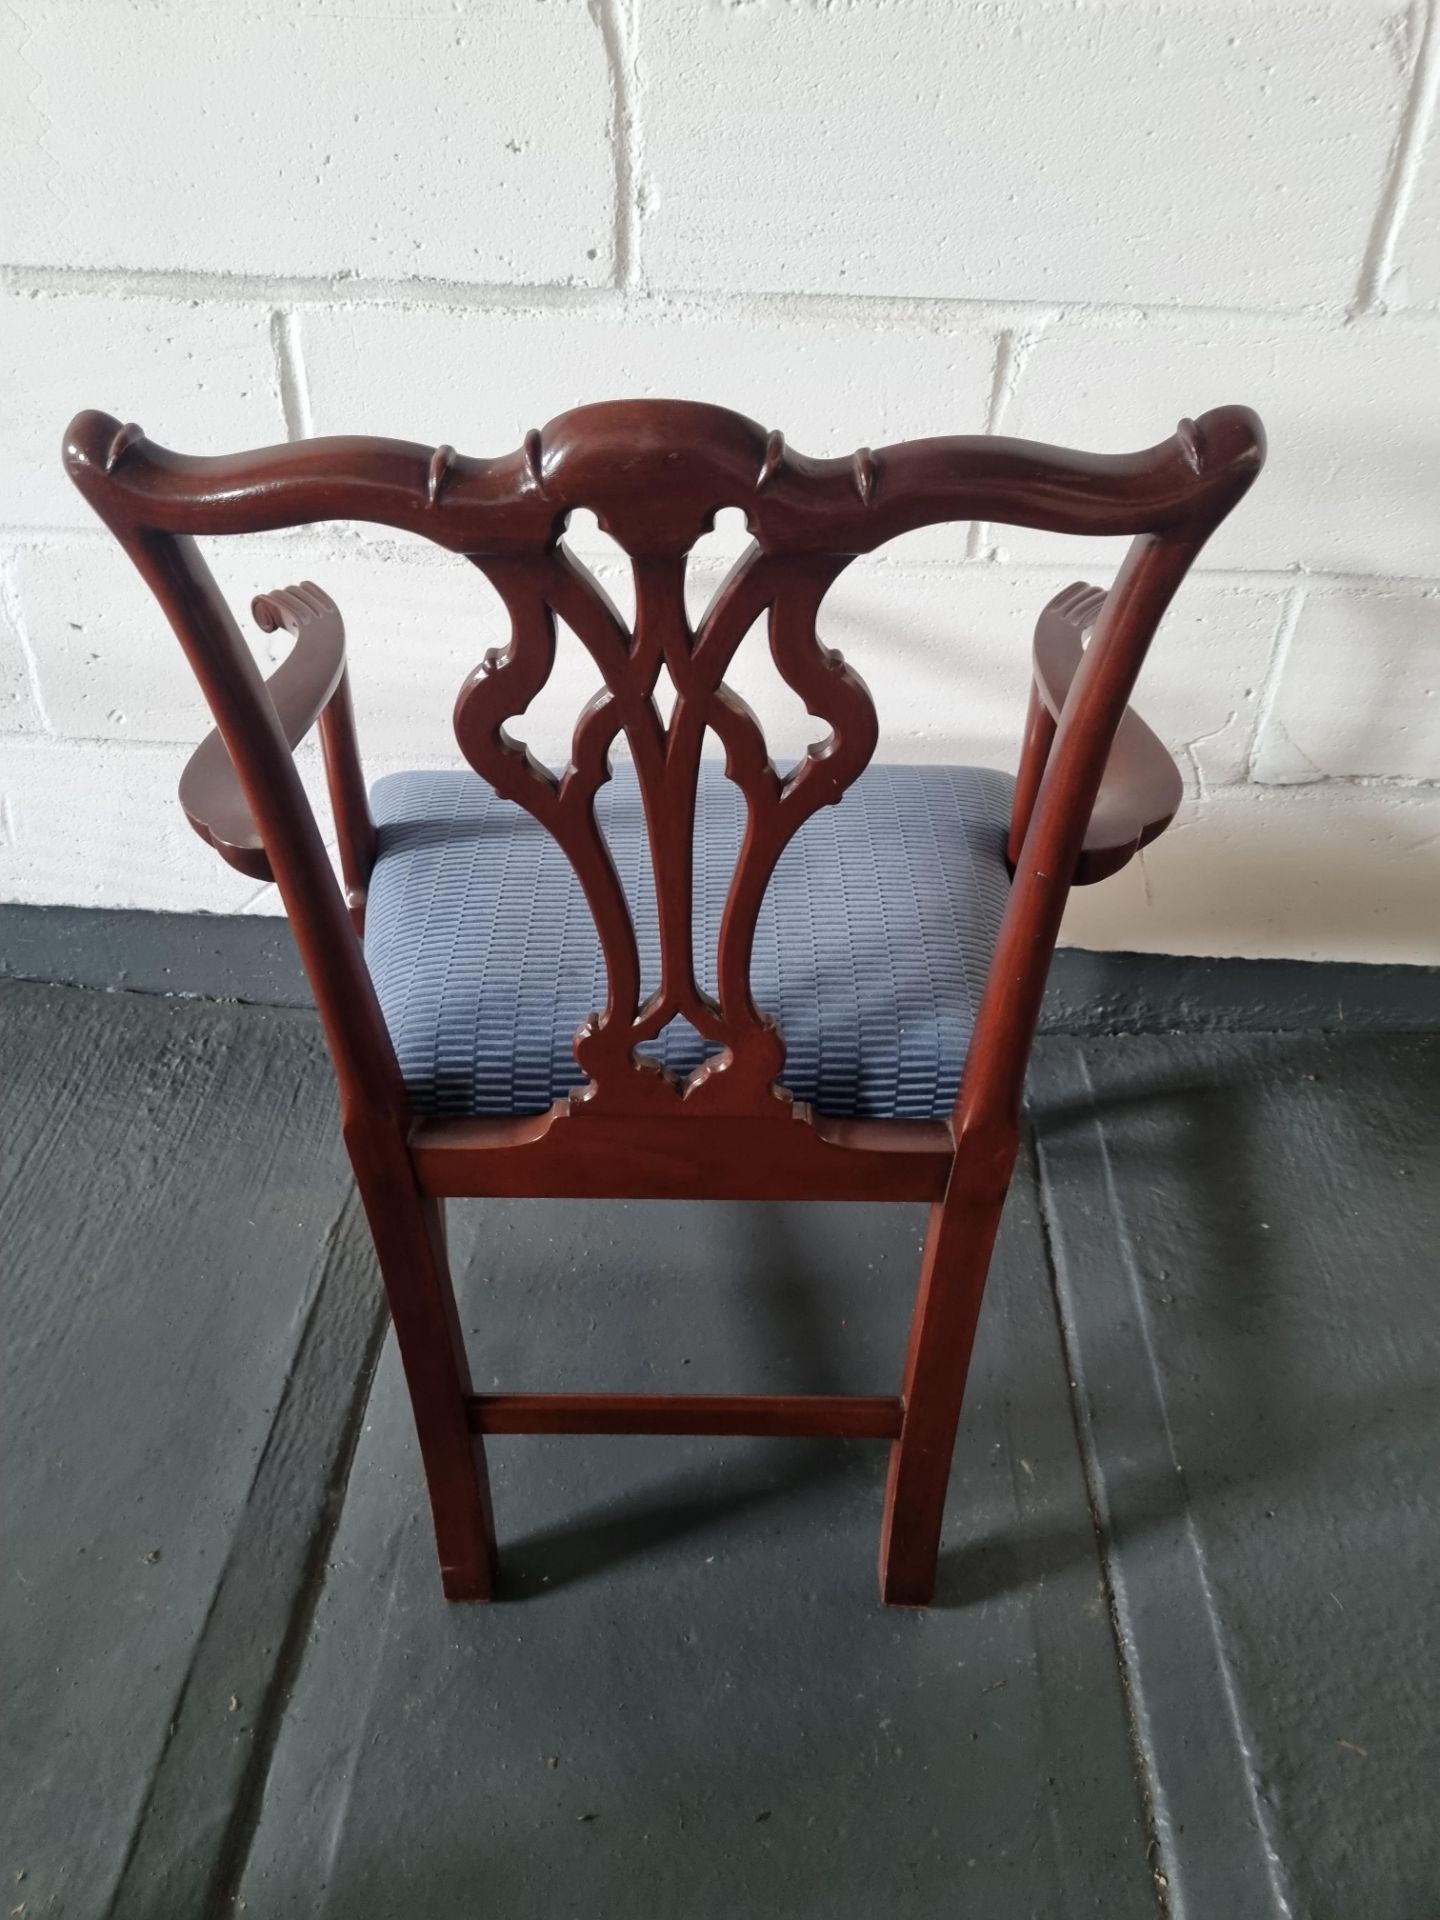 Arthur Brett Georgian-Style Dining Arm Chair With Bespoke Blue Upholstered Beautifully - Image 2 of 5